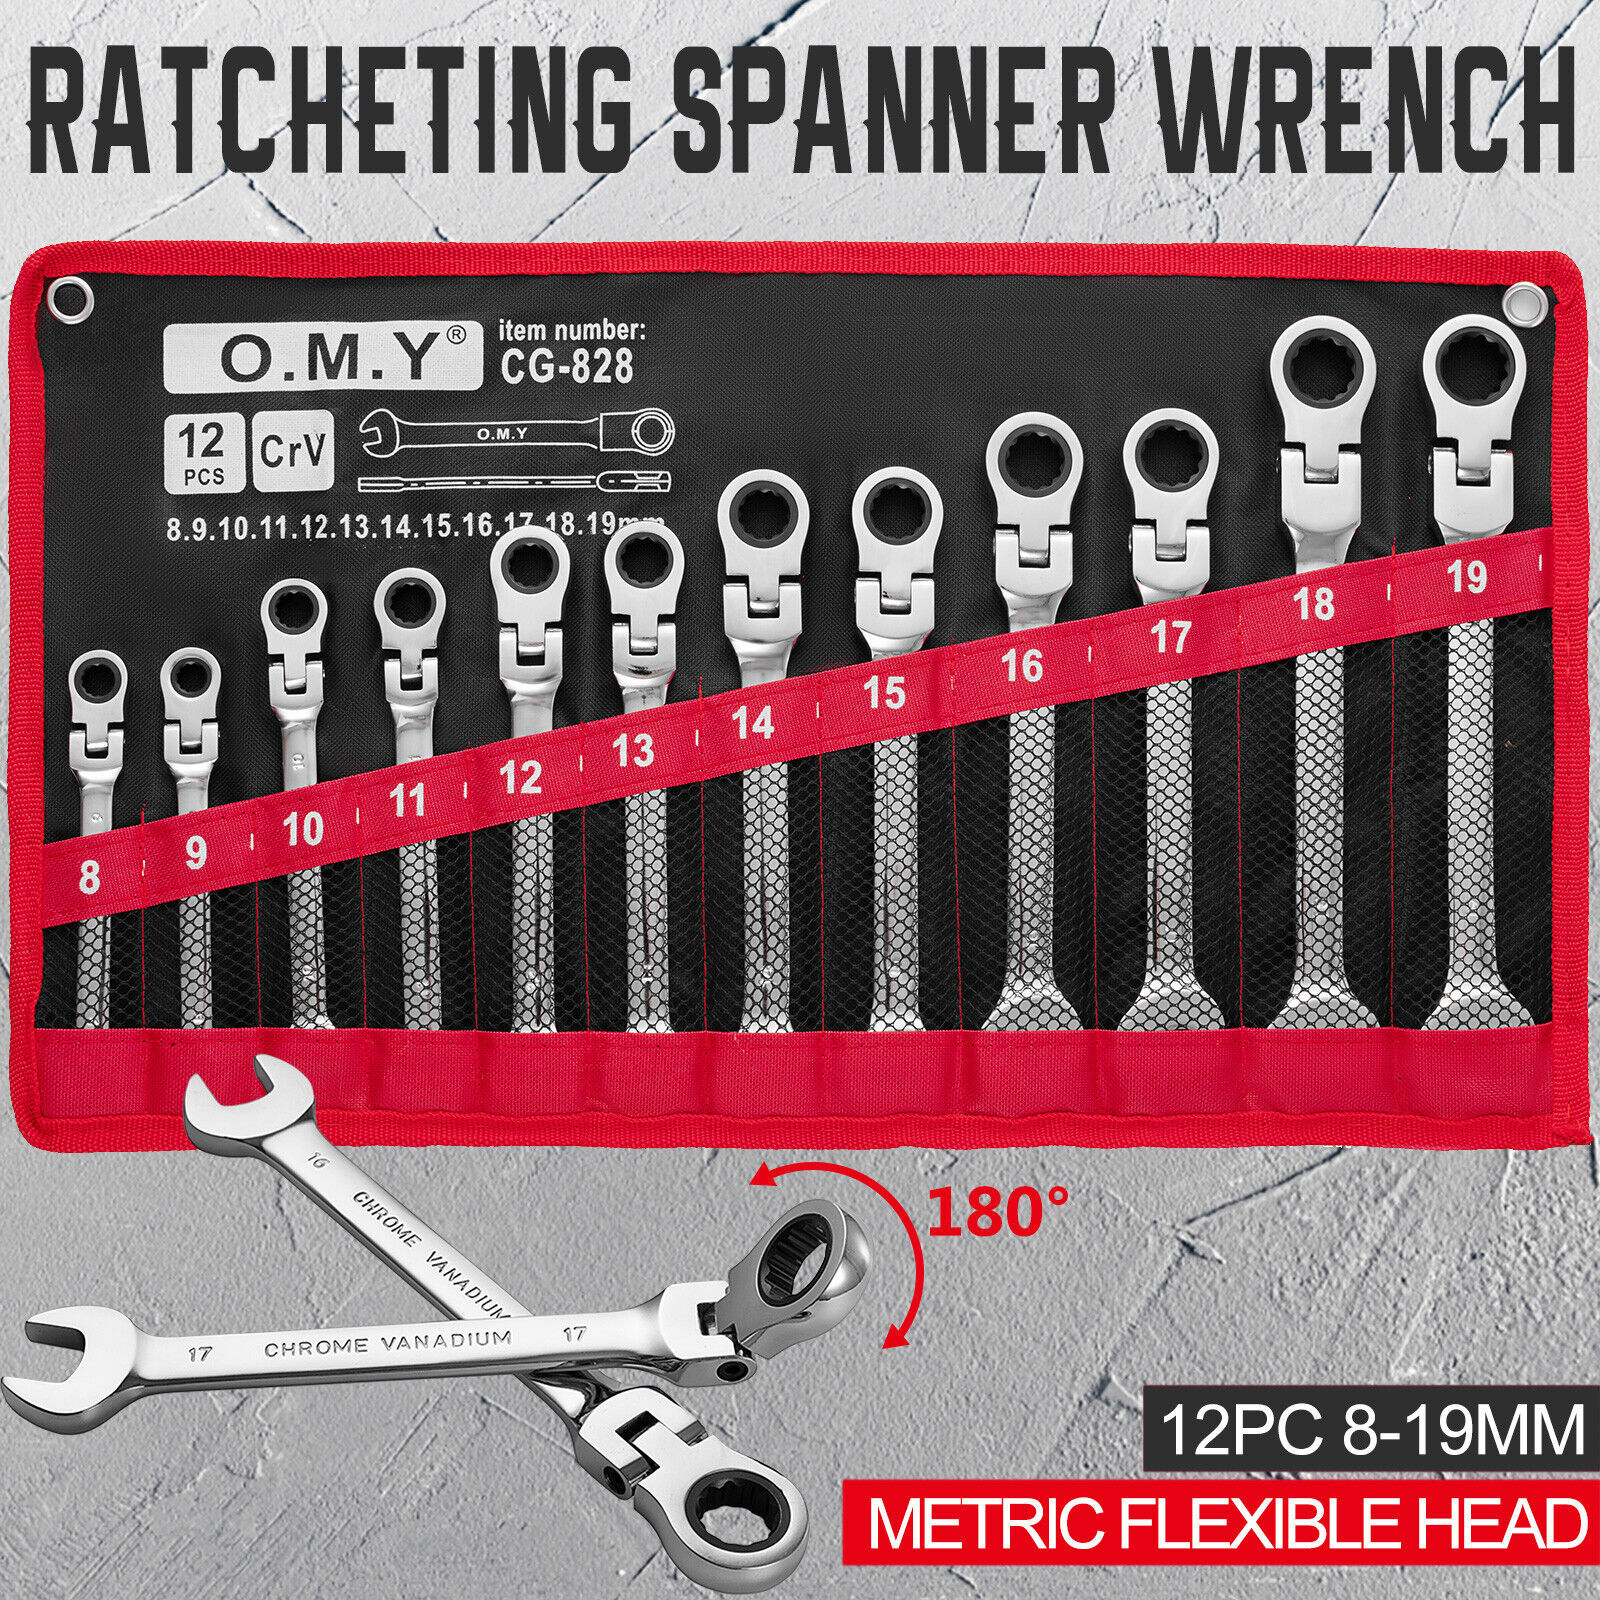 Primary image for 12Pc 8-19Mm Metric Flexible Head Ratcheting Wrench Combination Spanner Tool Set